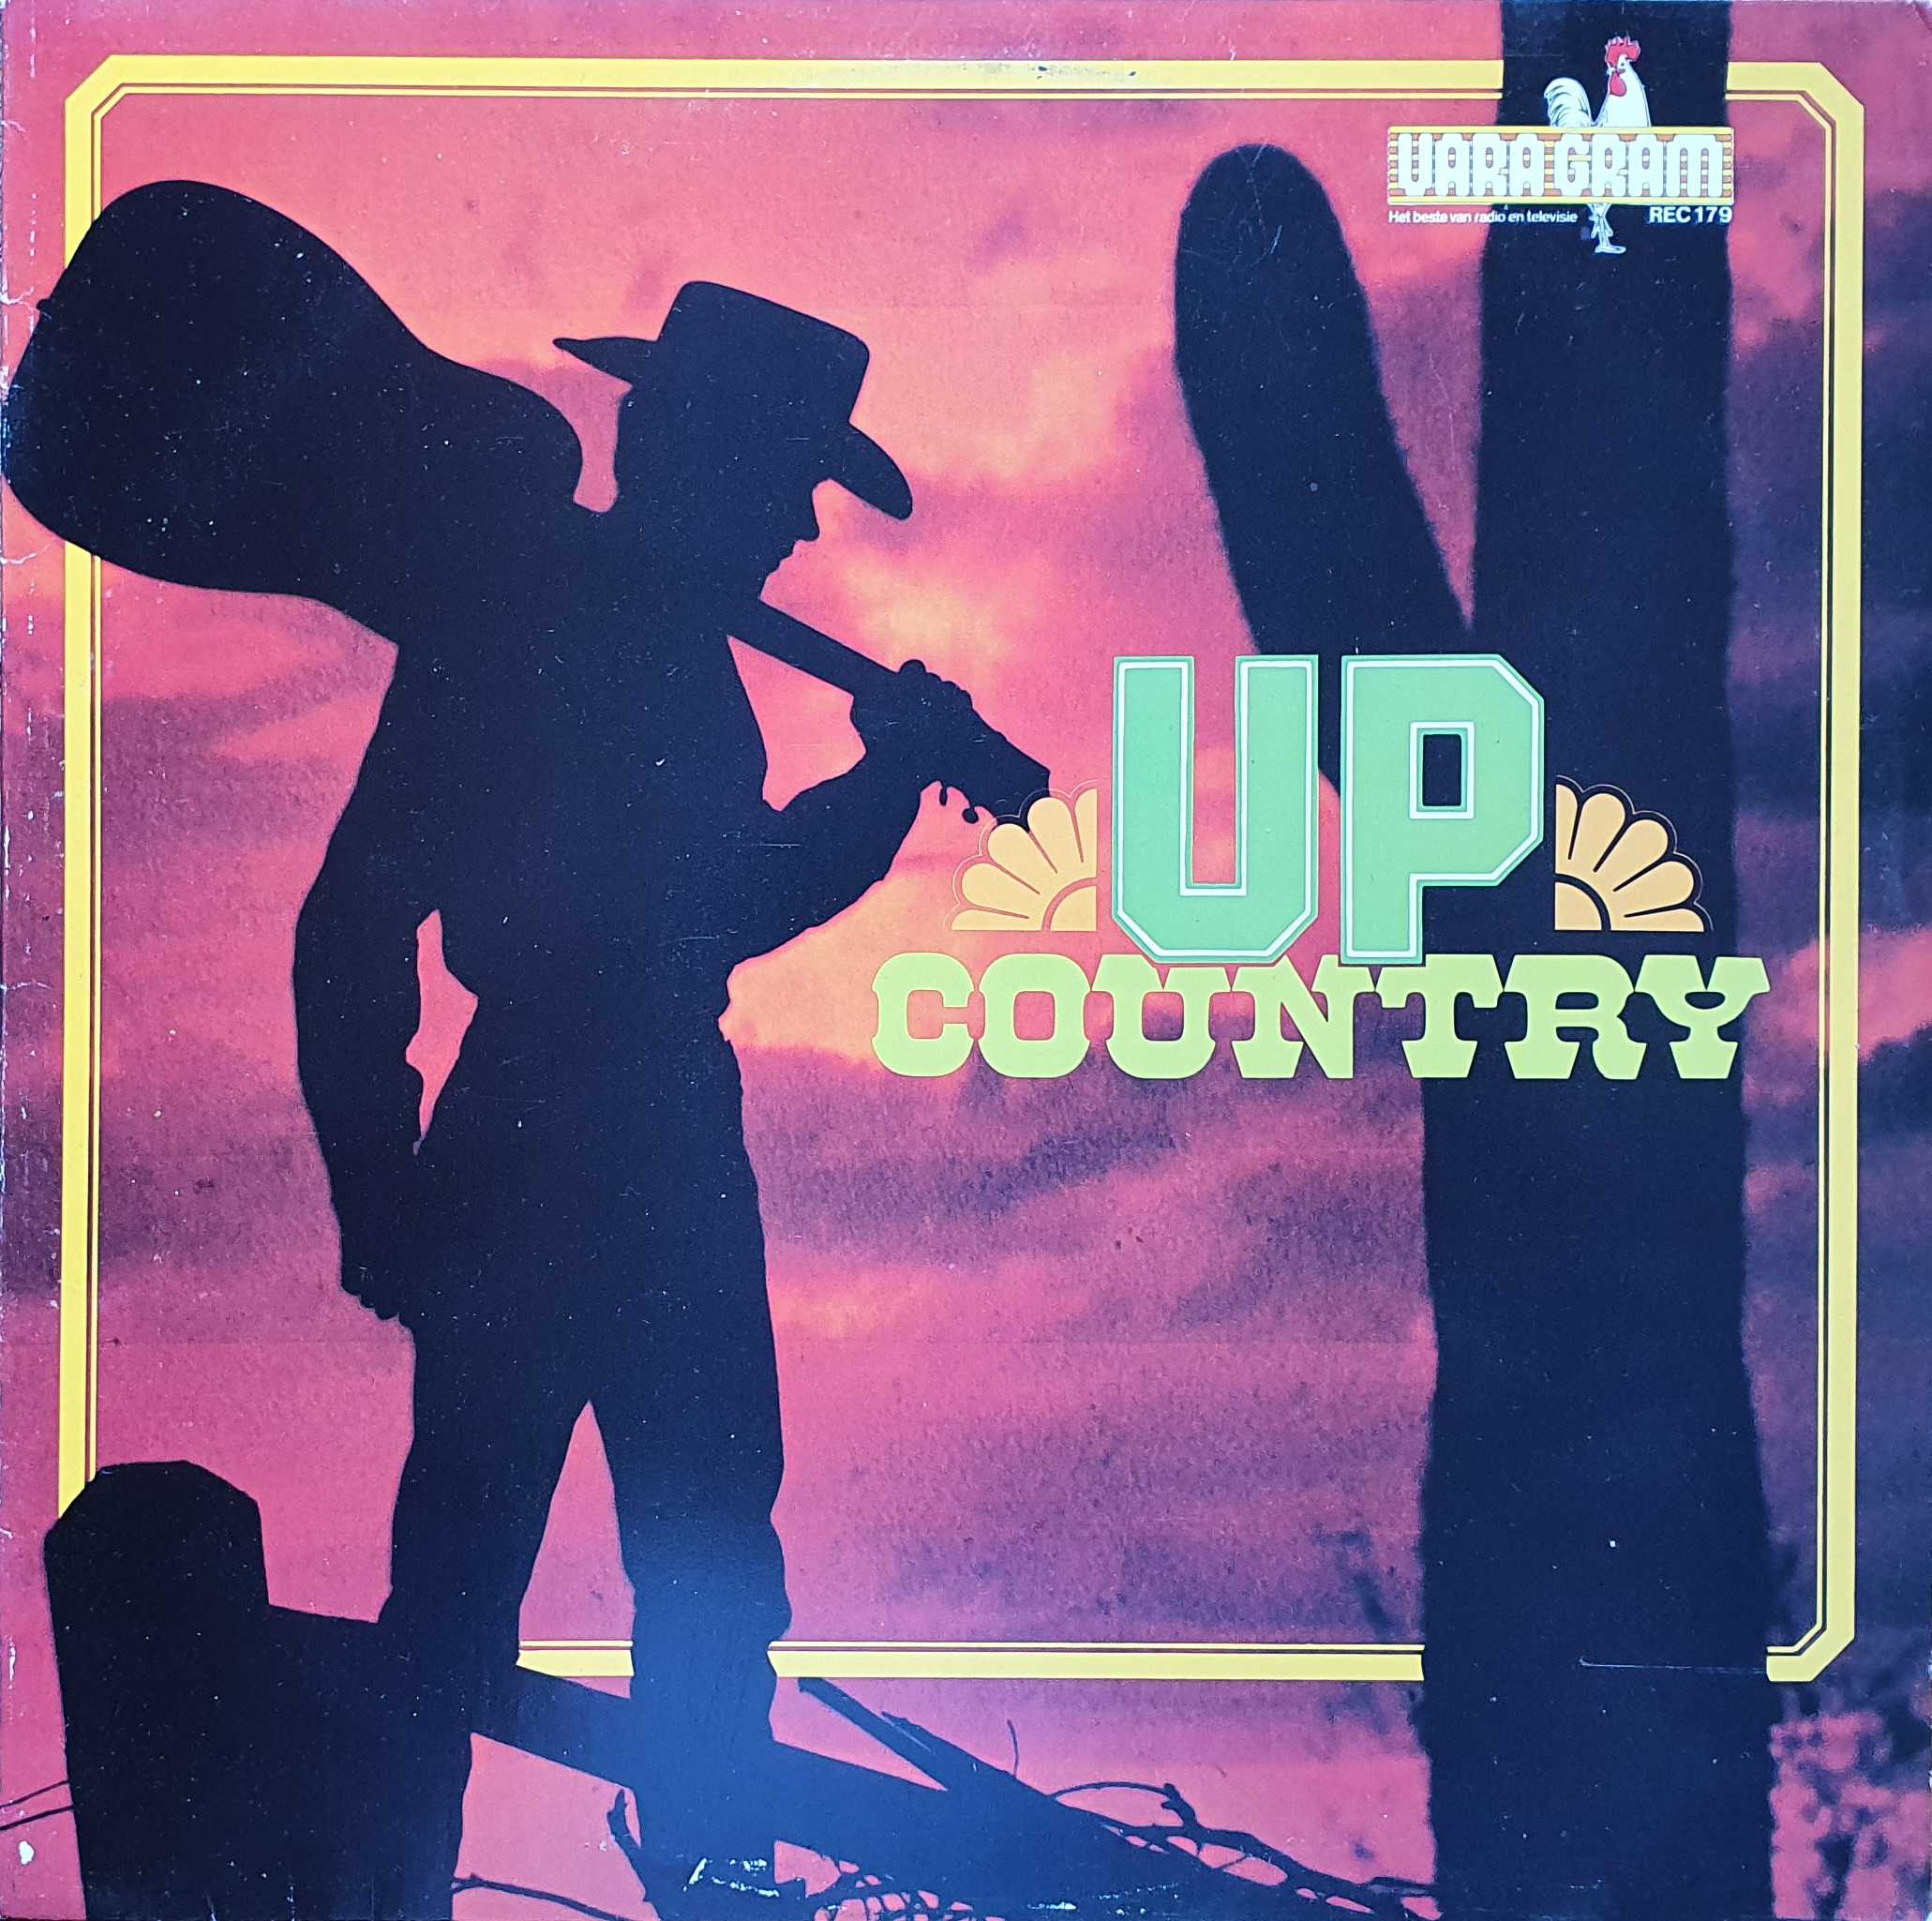 Picture of REC 179-iD Up country (Dutch import) by artist Various from the BBC albums - Records and Tapes library